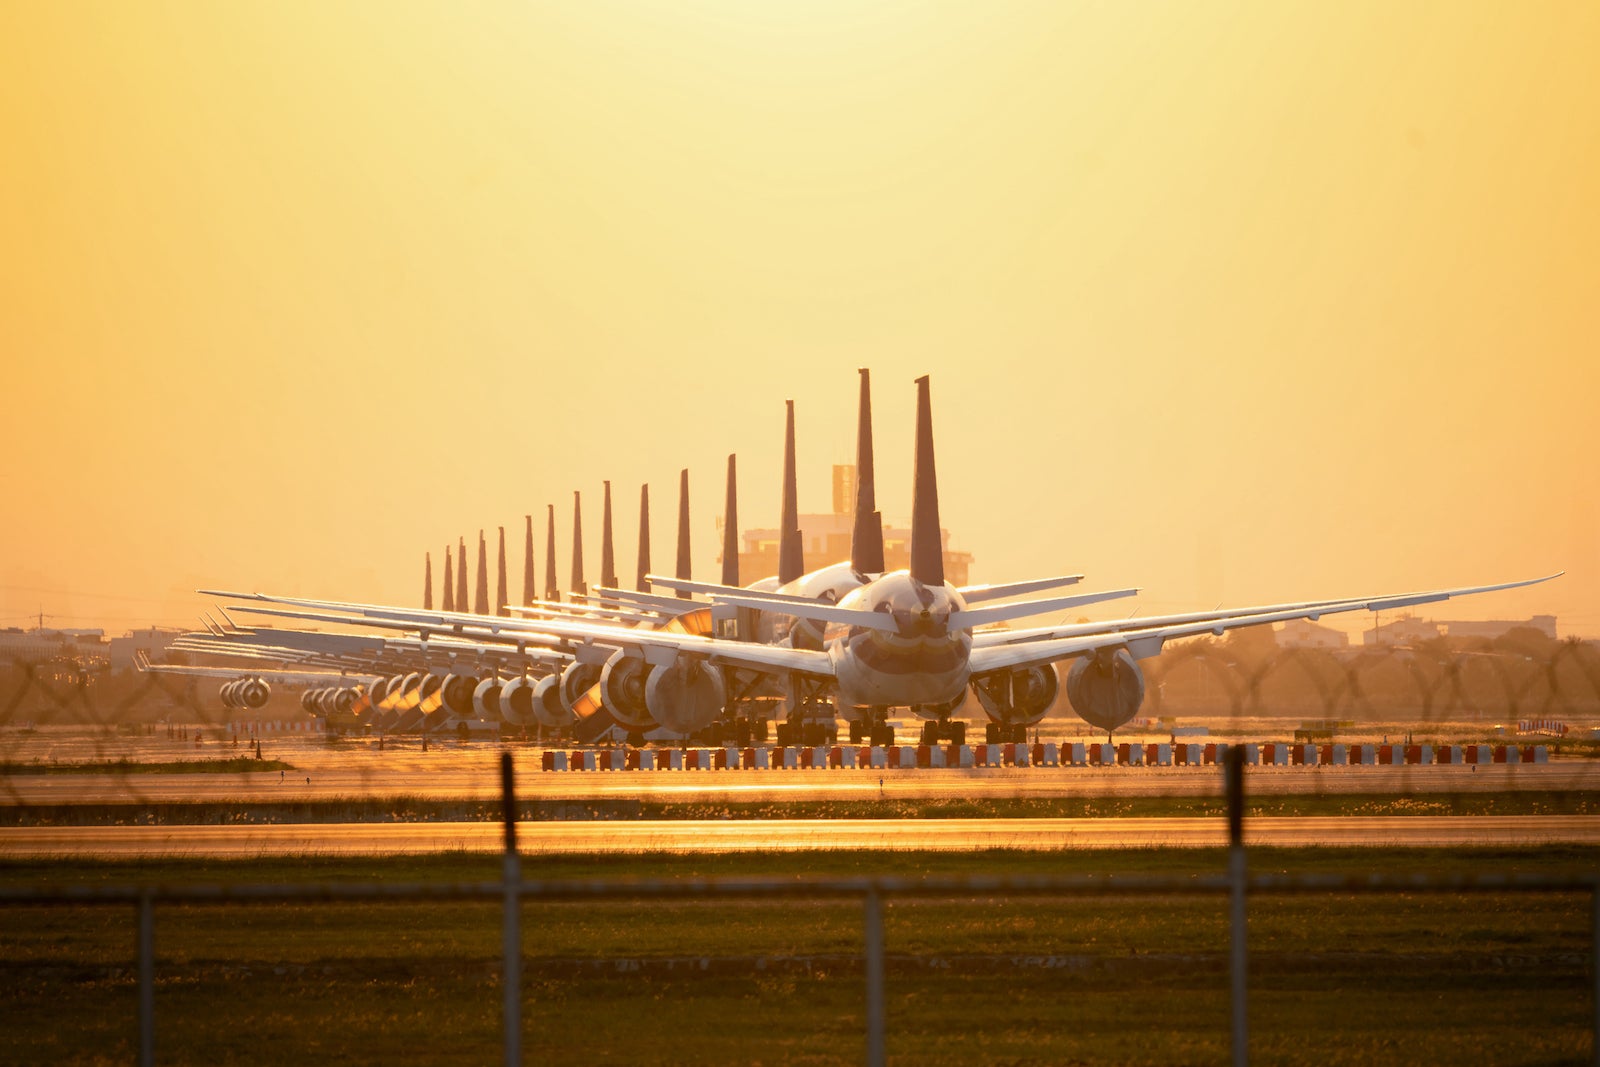 planes in line on a runway at sunset